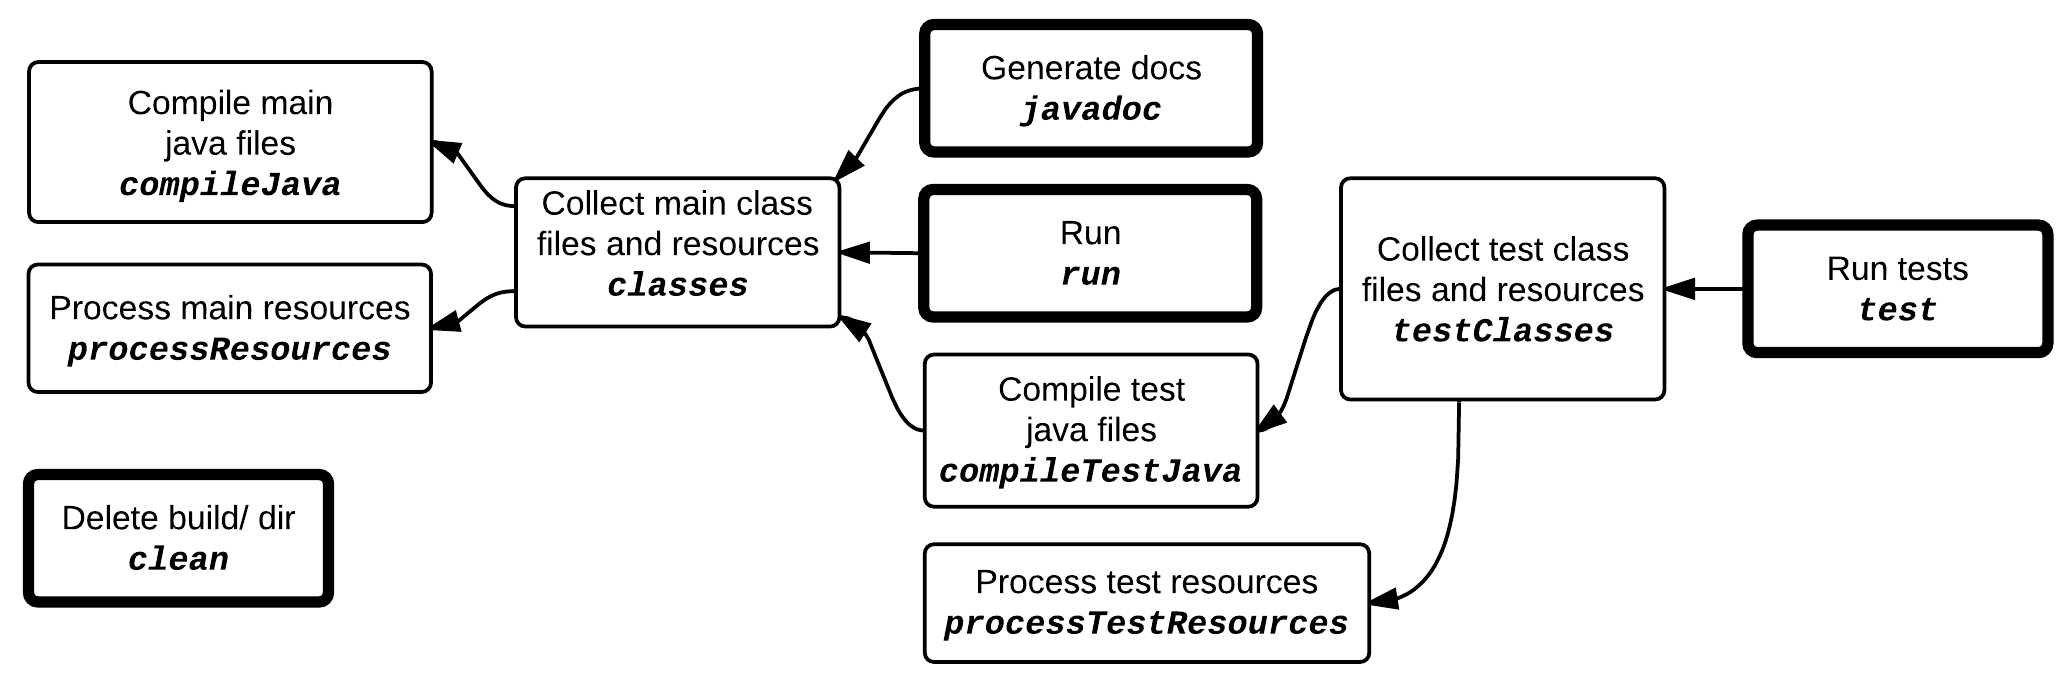 An example flowchart of some Java tasks generated by Gradle and how they depend on one another.